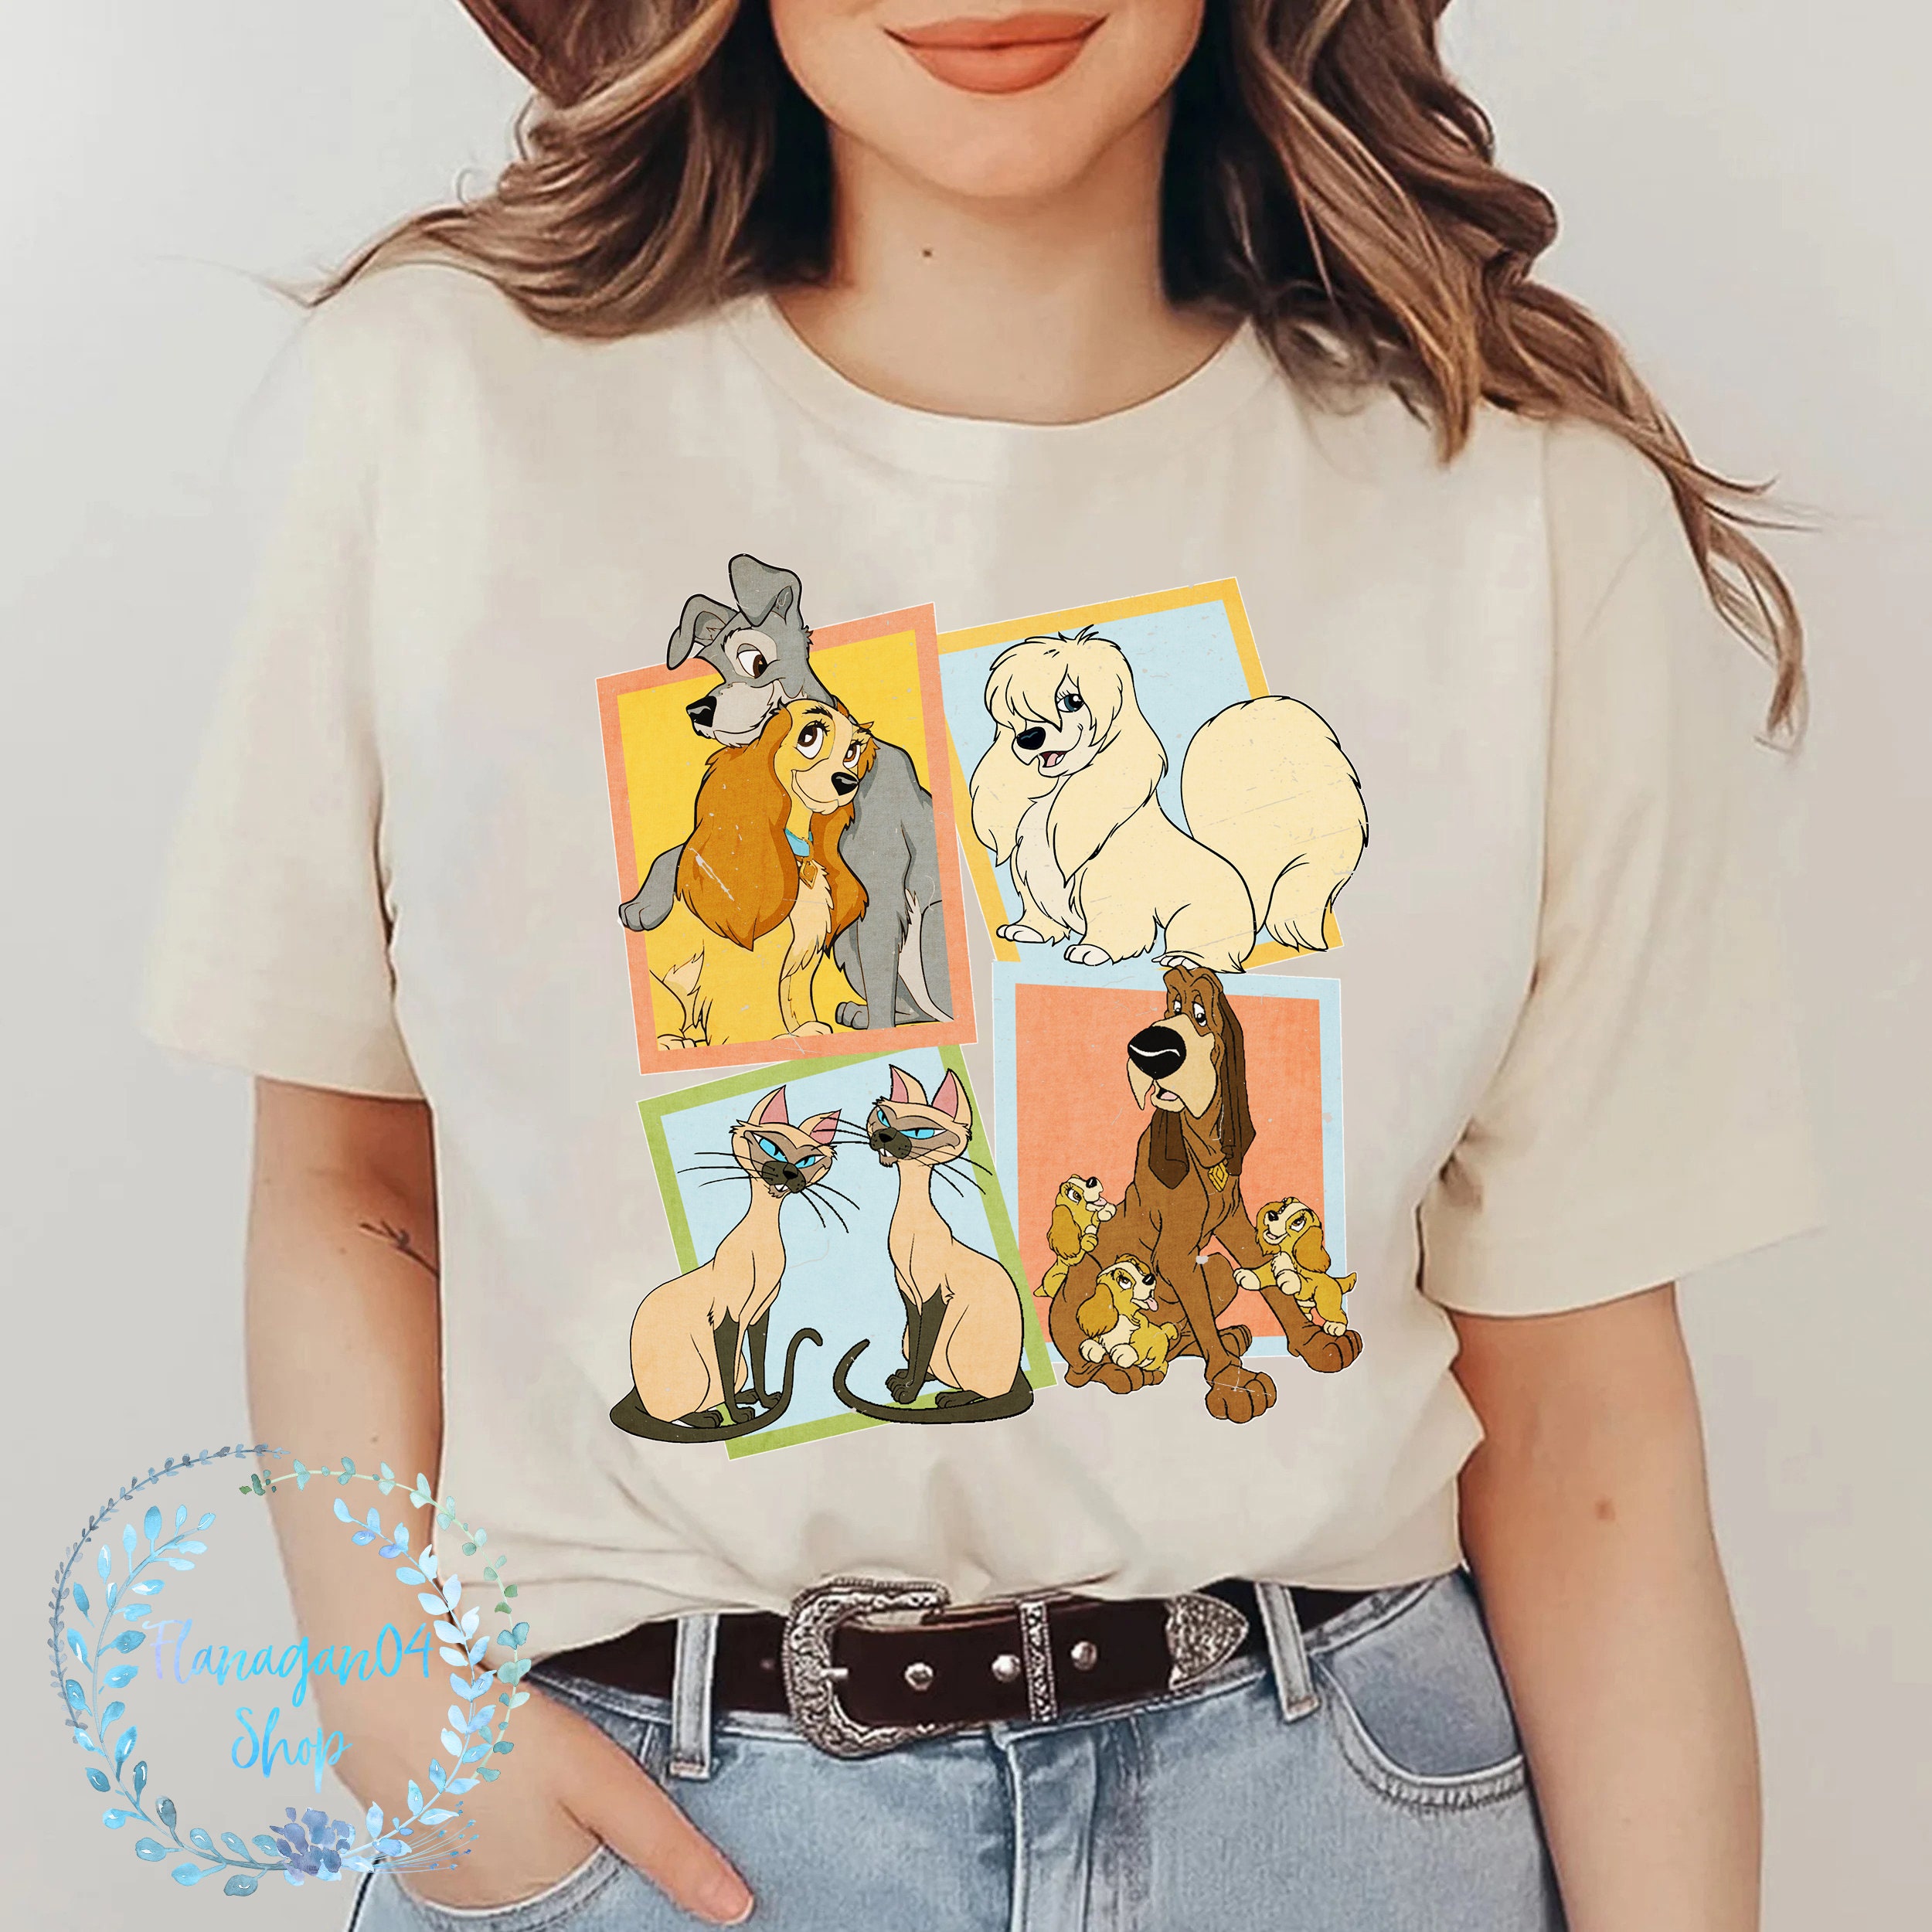 Discover Vintage 90's Lady and the Tramp Sweatshirt, Retro Disney hoodie, Matching Family tee, Si and Am, Peg Trusty Dog, Disney Dog Shirt, TL-210901